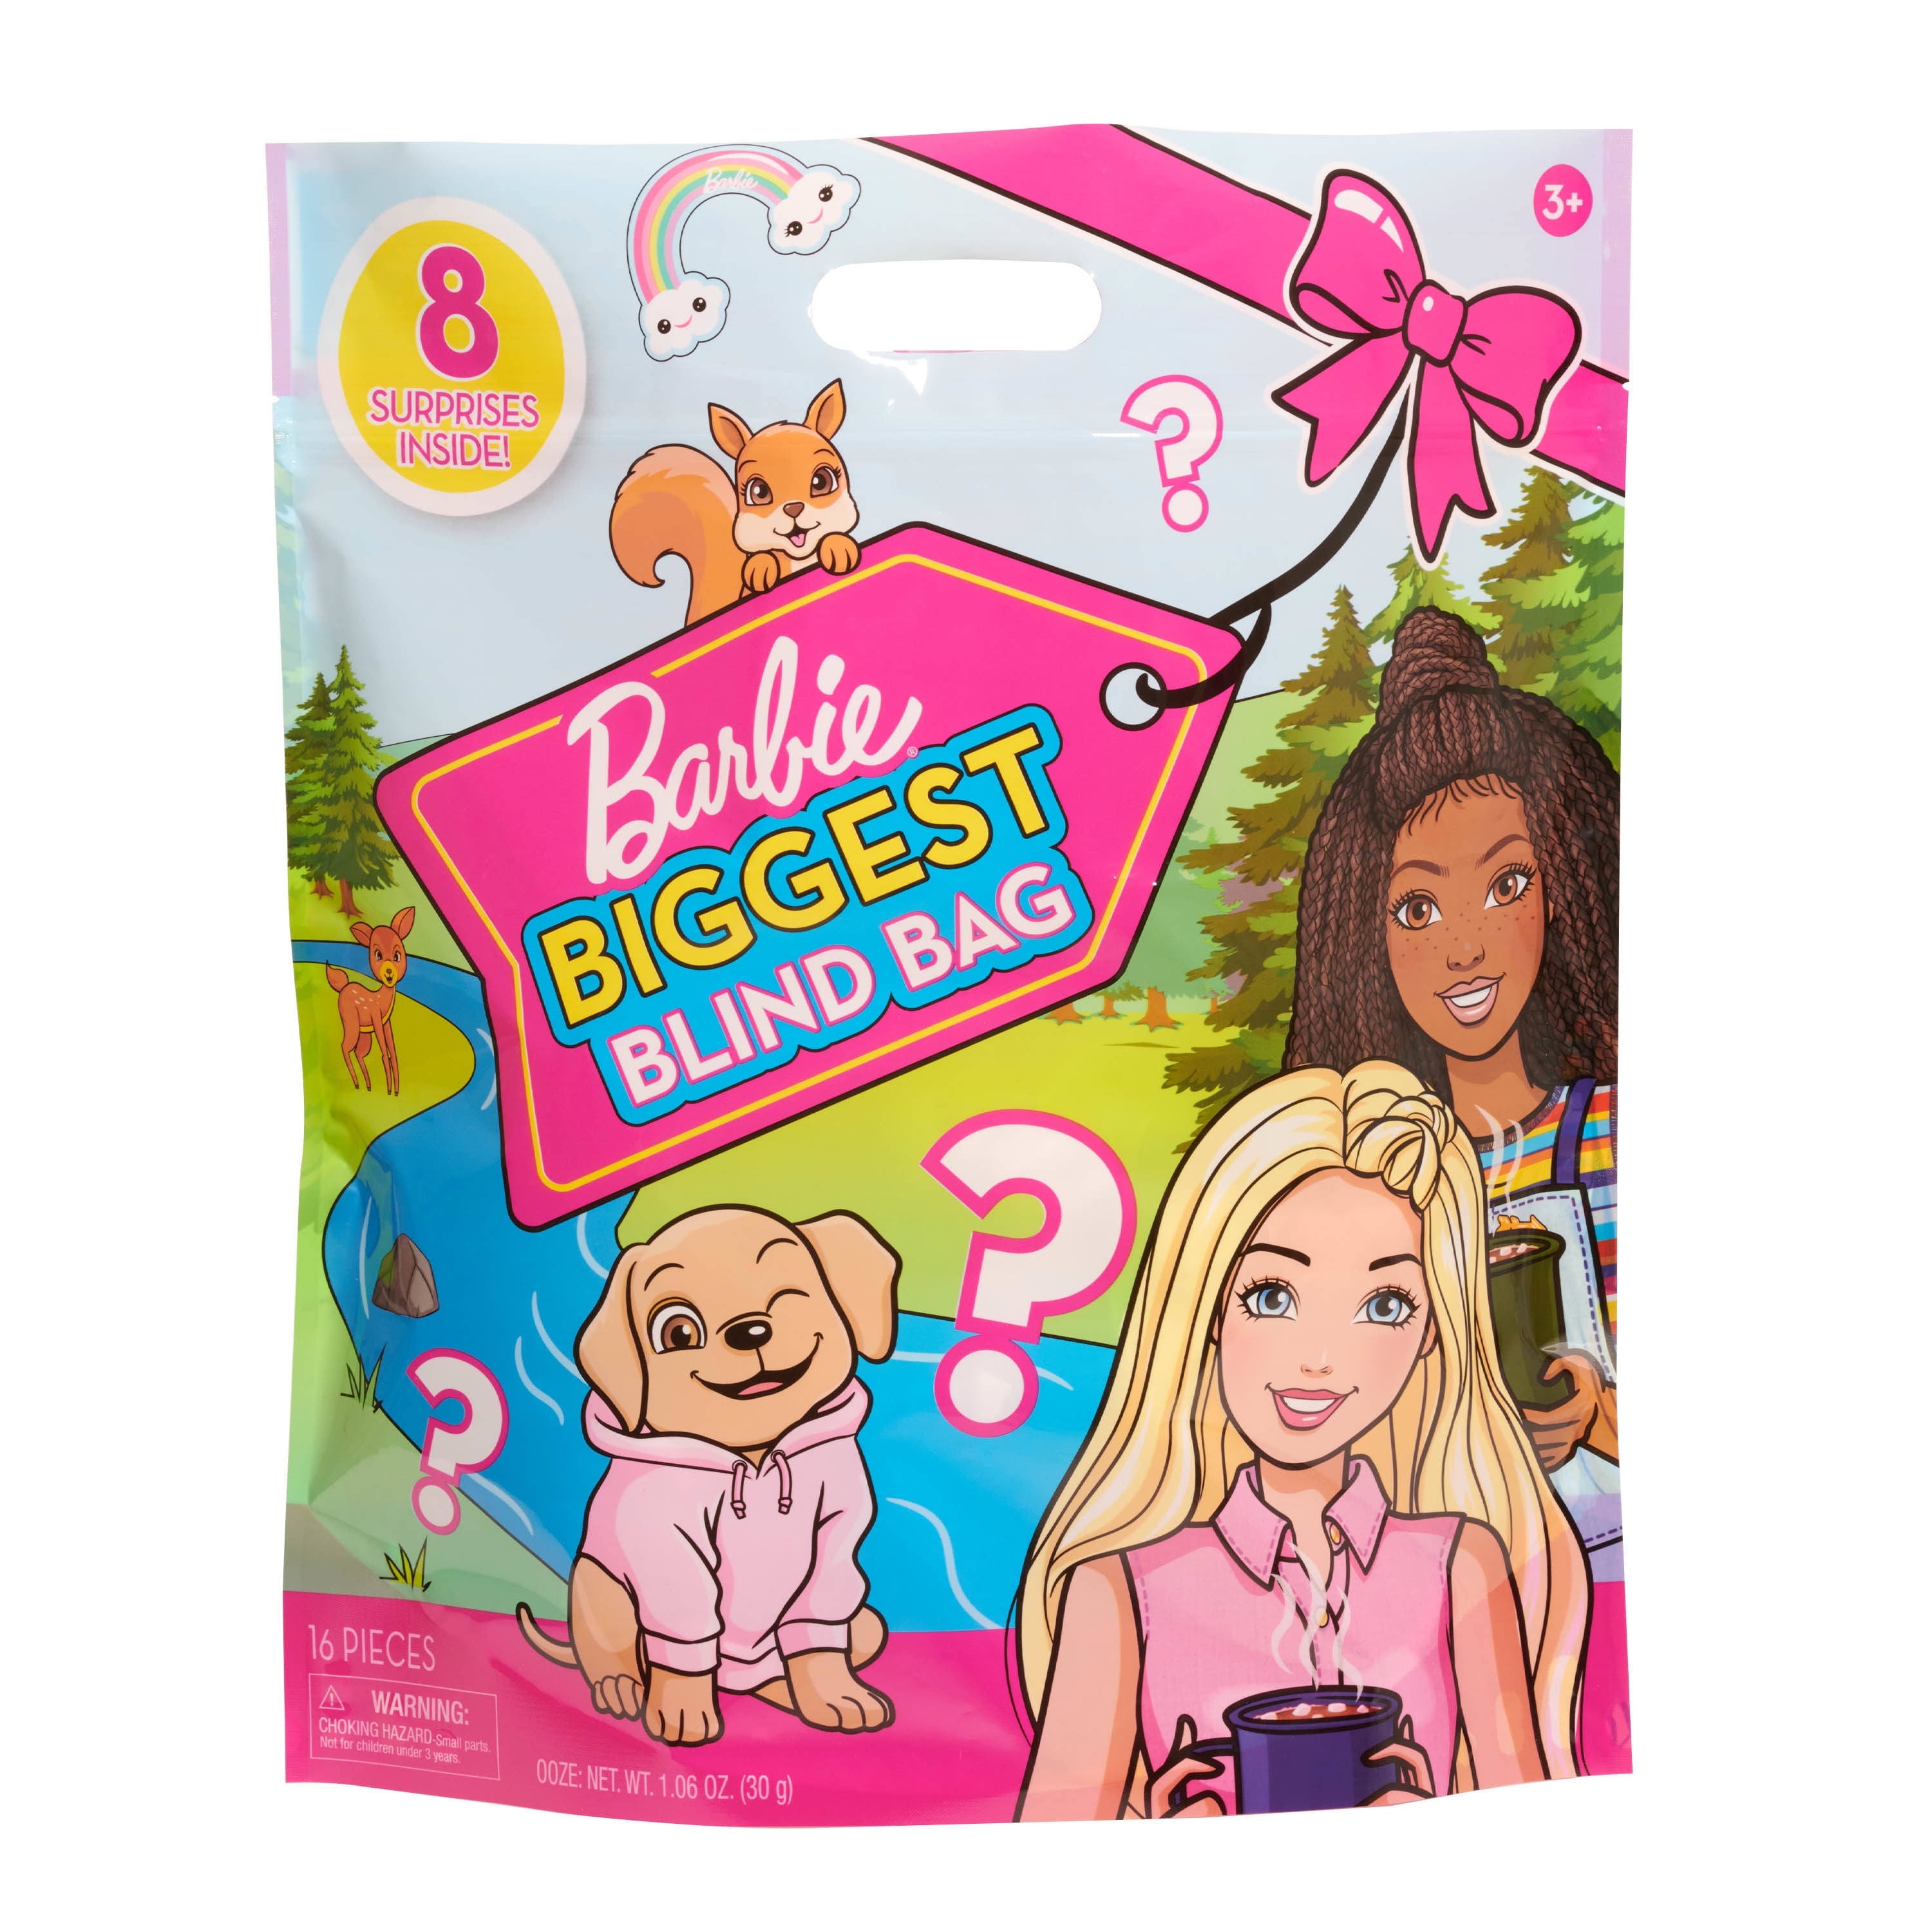 Barbie Biggest Blind Bag,  Kids Toys for Ages 3 Up, Gifts and Presents